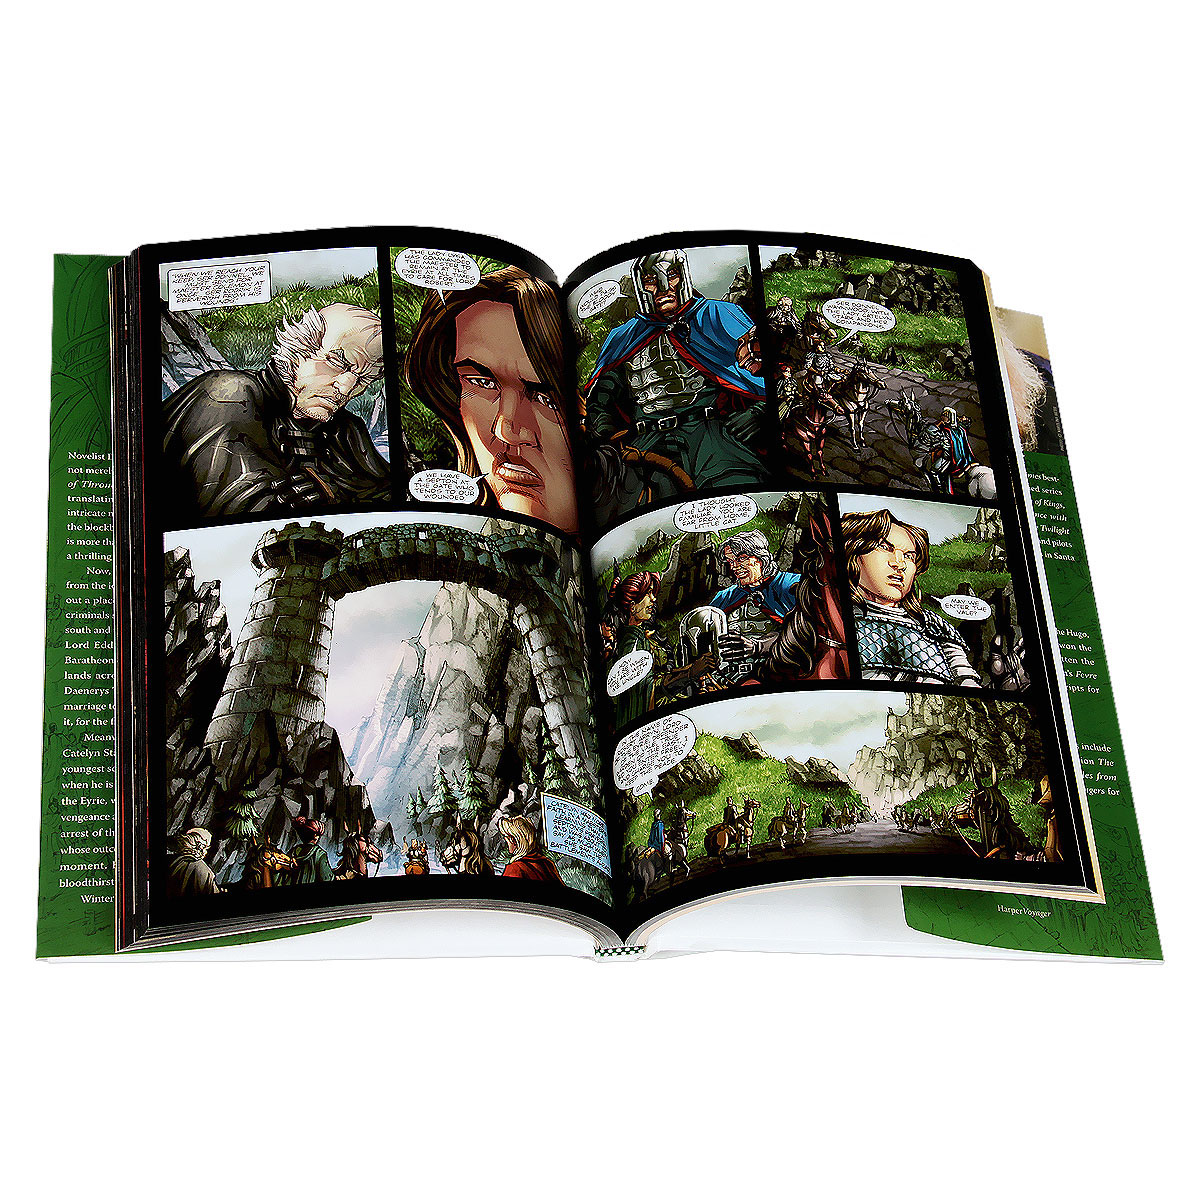 Game Of Thrones: The Graphic Novel